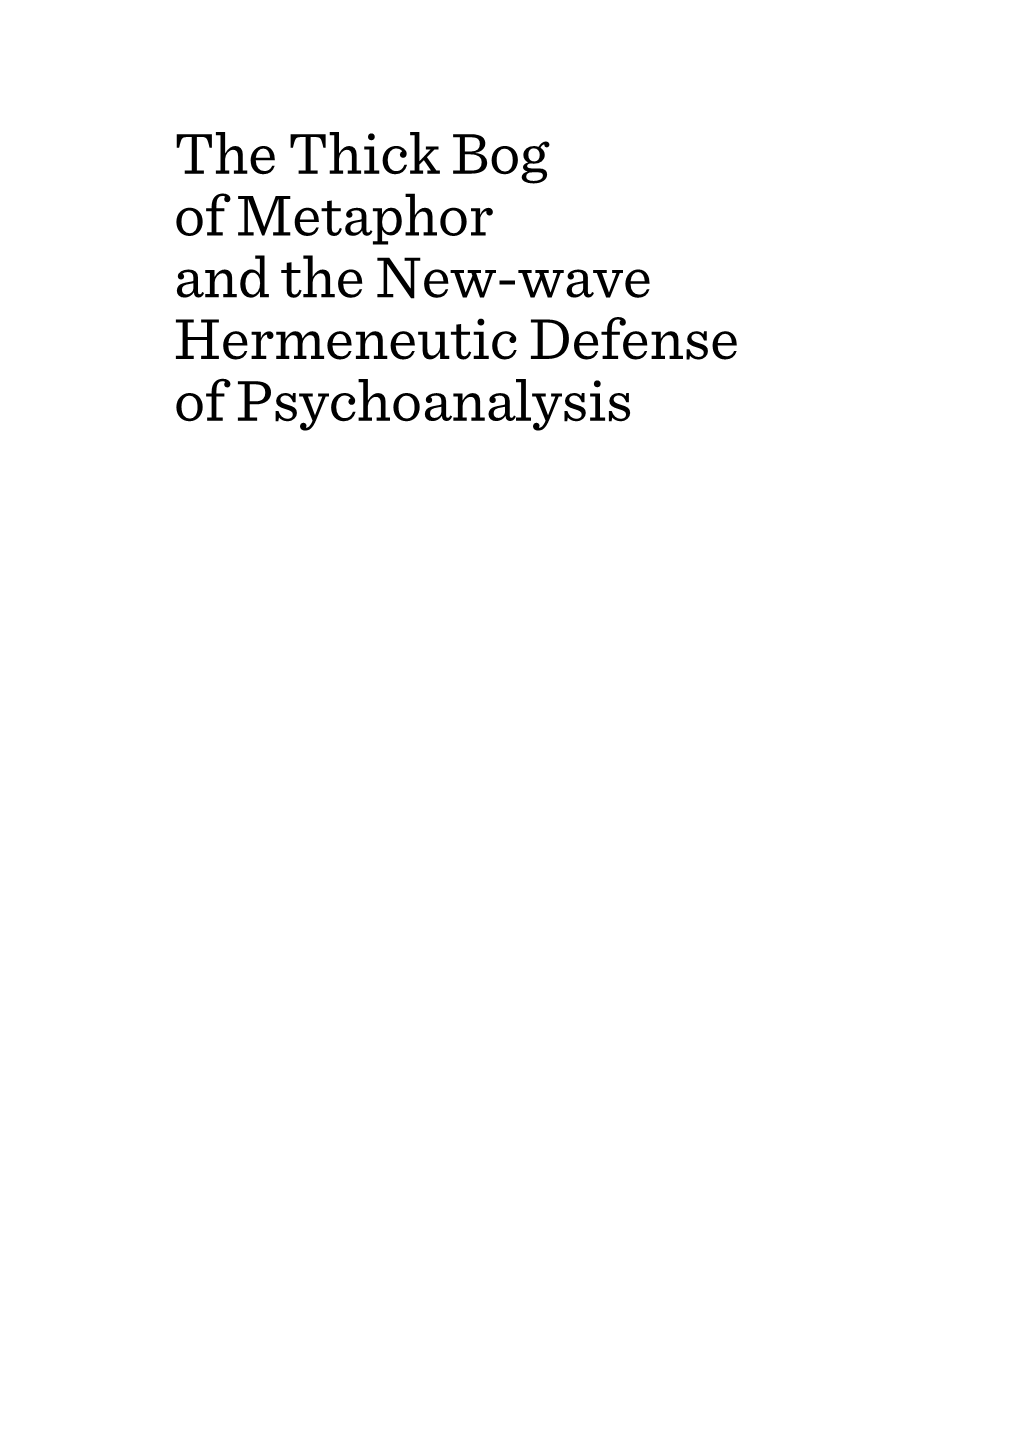 The Thick Bog of Metaphor and the New-Wave Hermeneutic Defense of Psychoanalysis